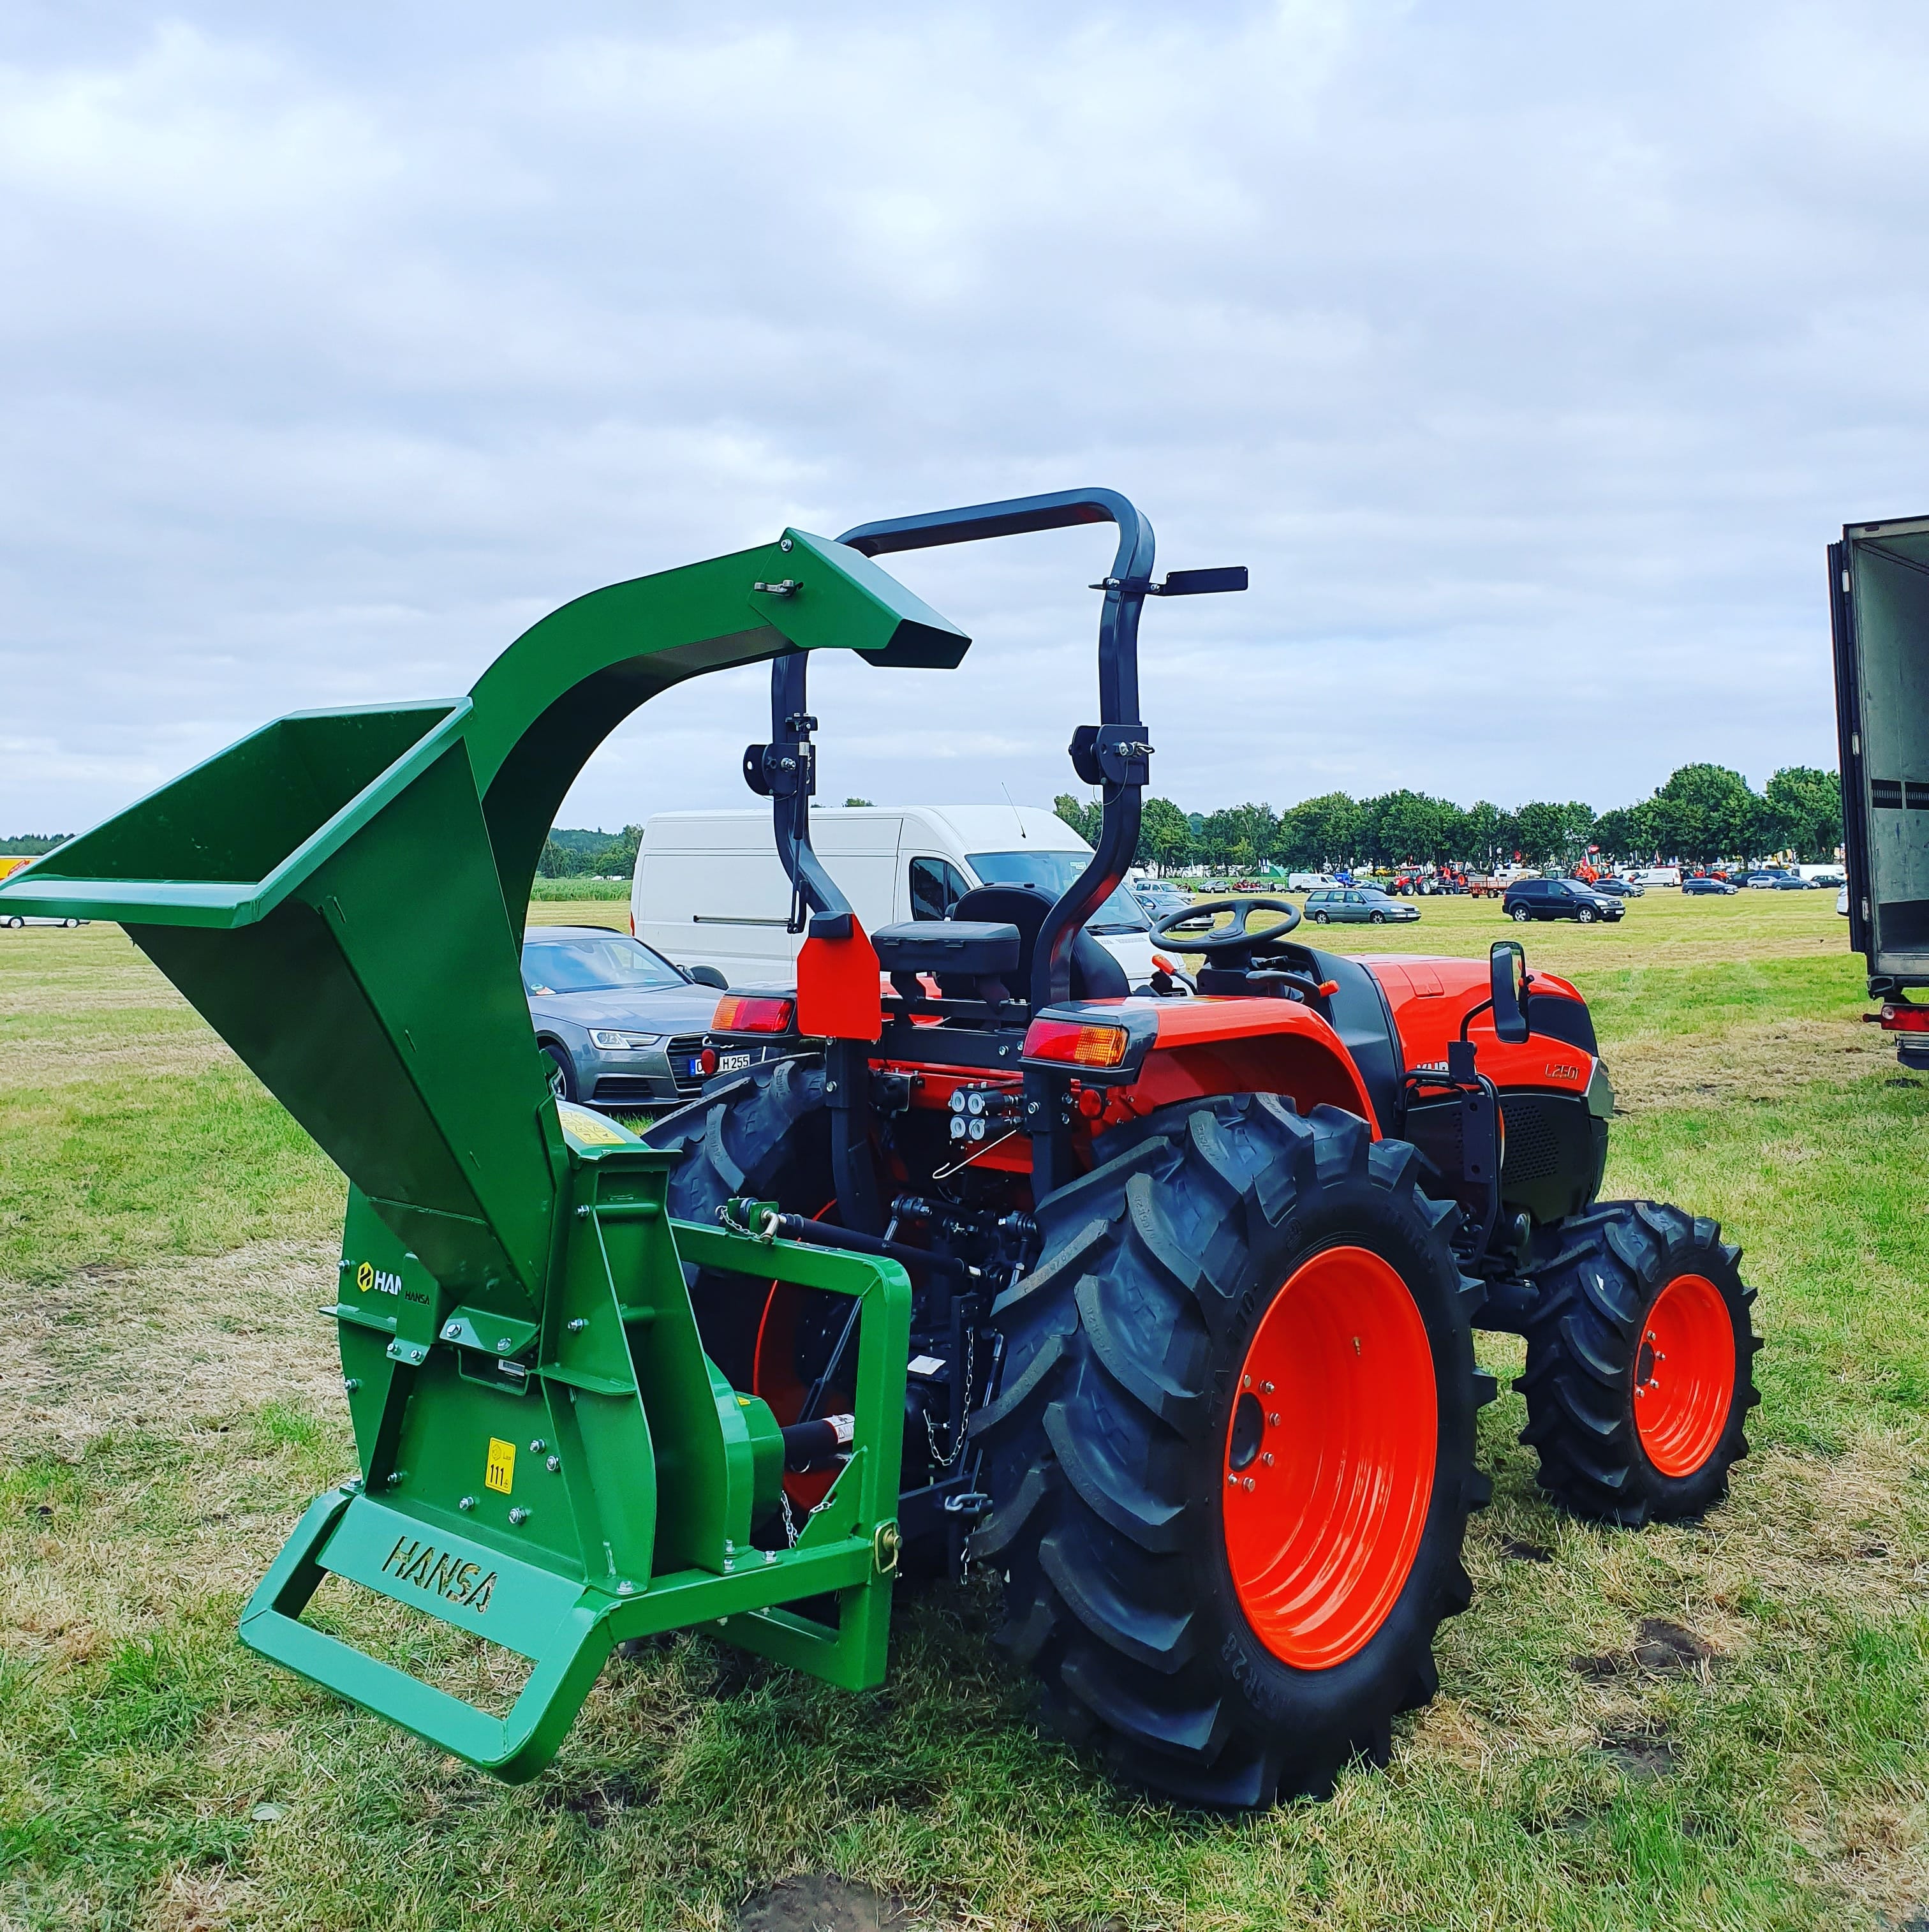 The HANSA C21PTO hitched to a Kubota Tractor